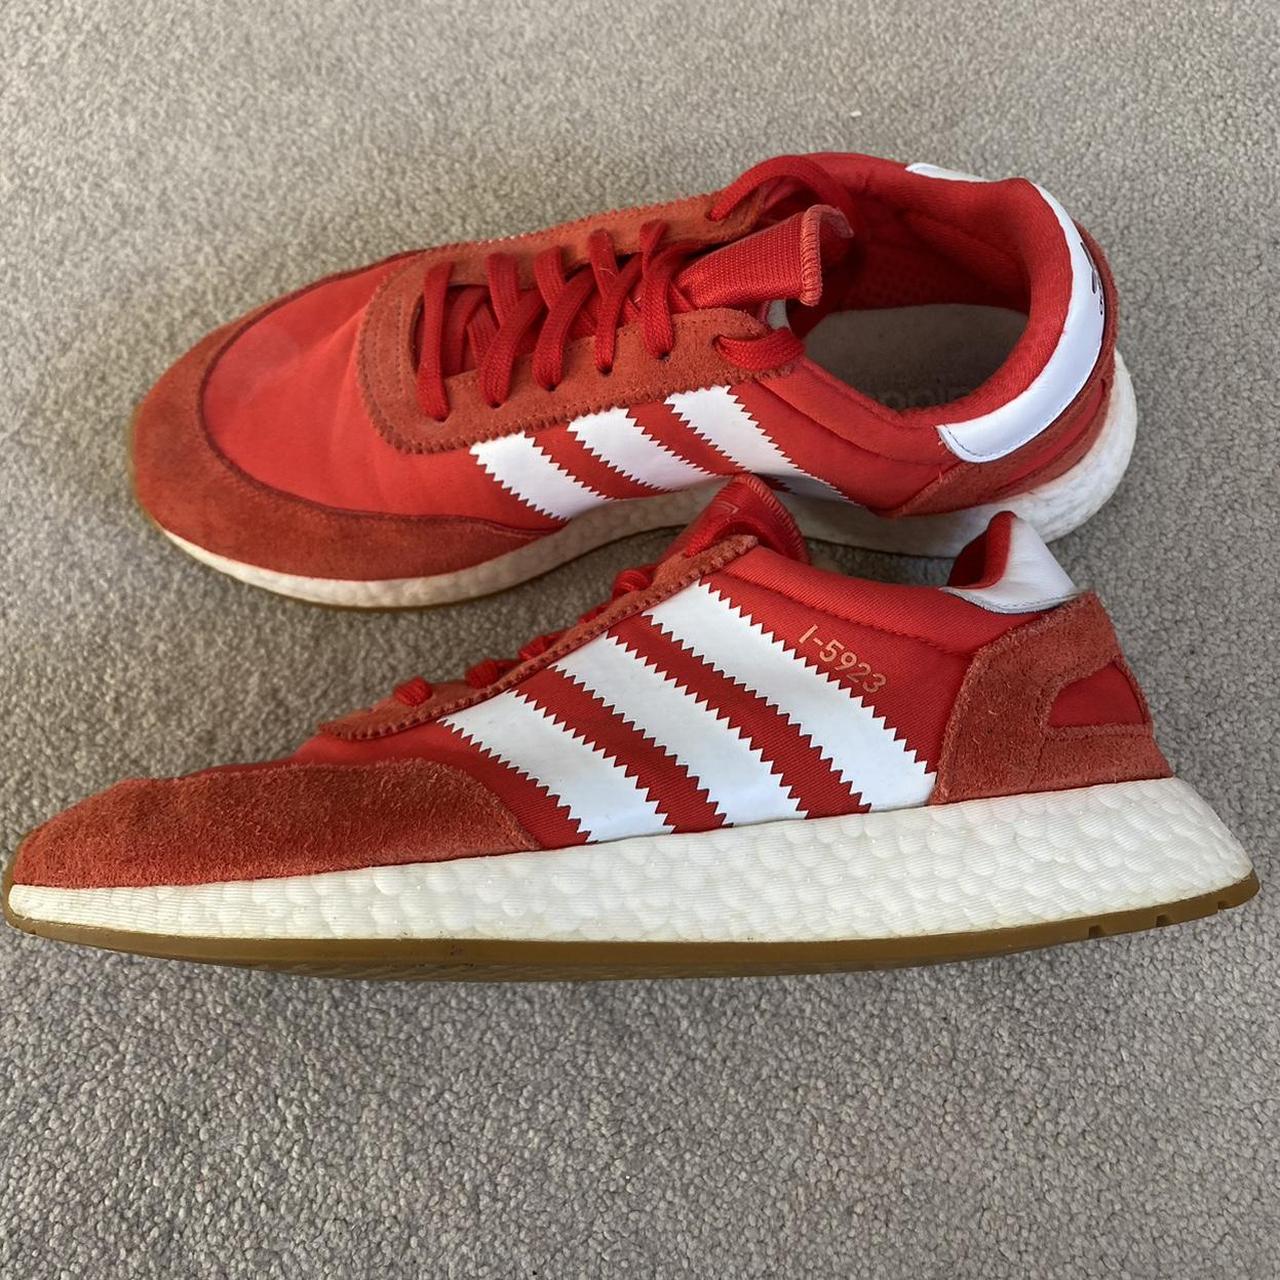 Adidas Iniki/ I-5923 - Red - Great condition 8/10... - Depop